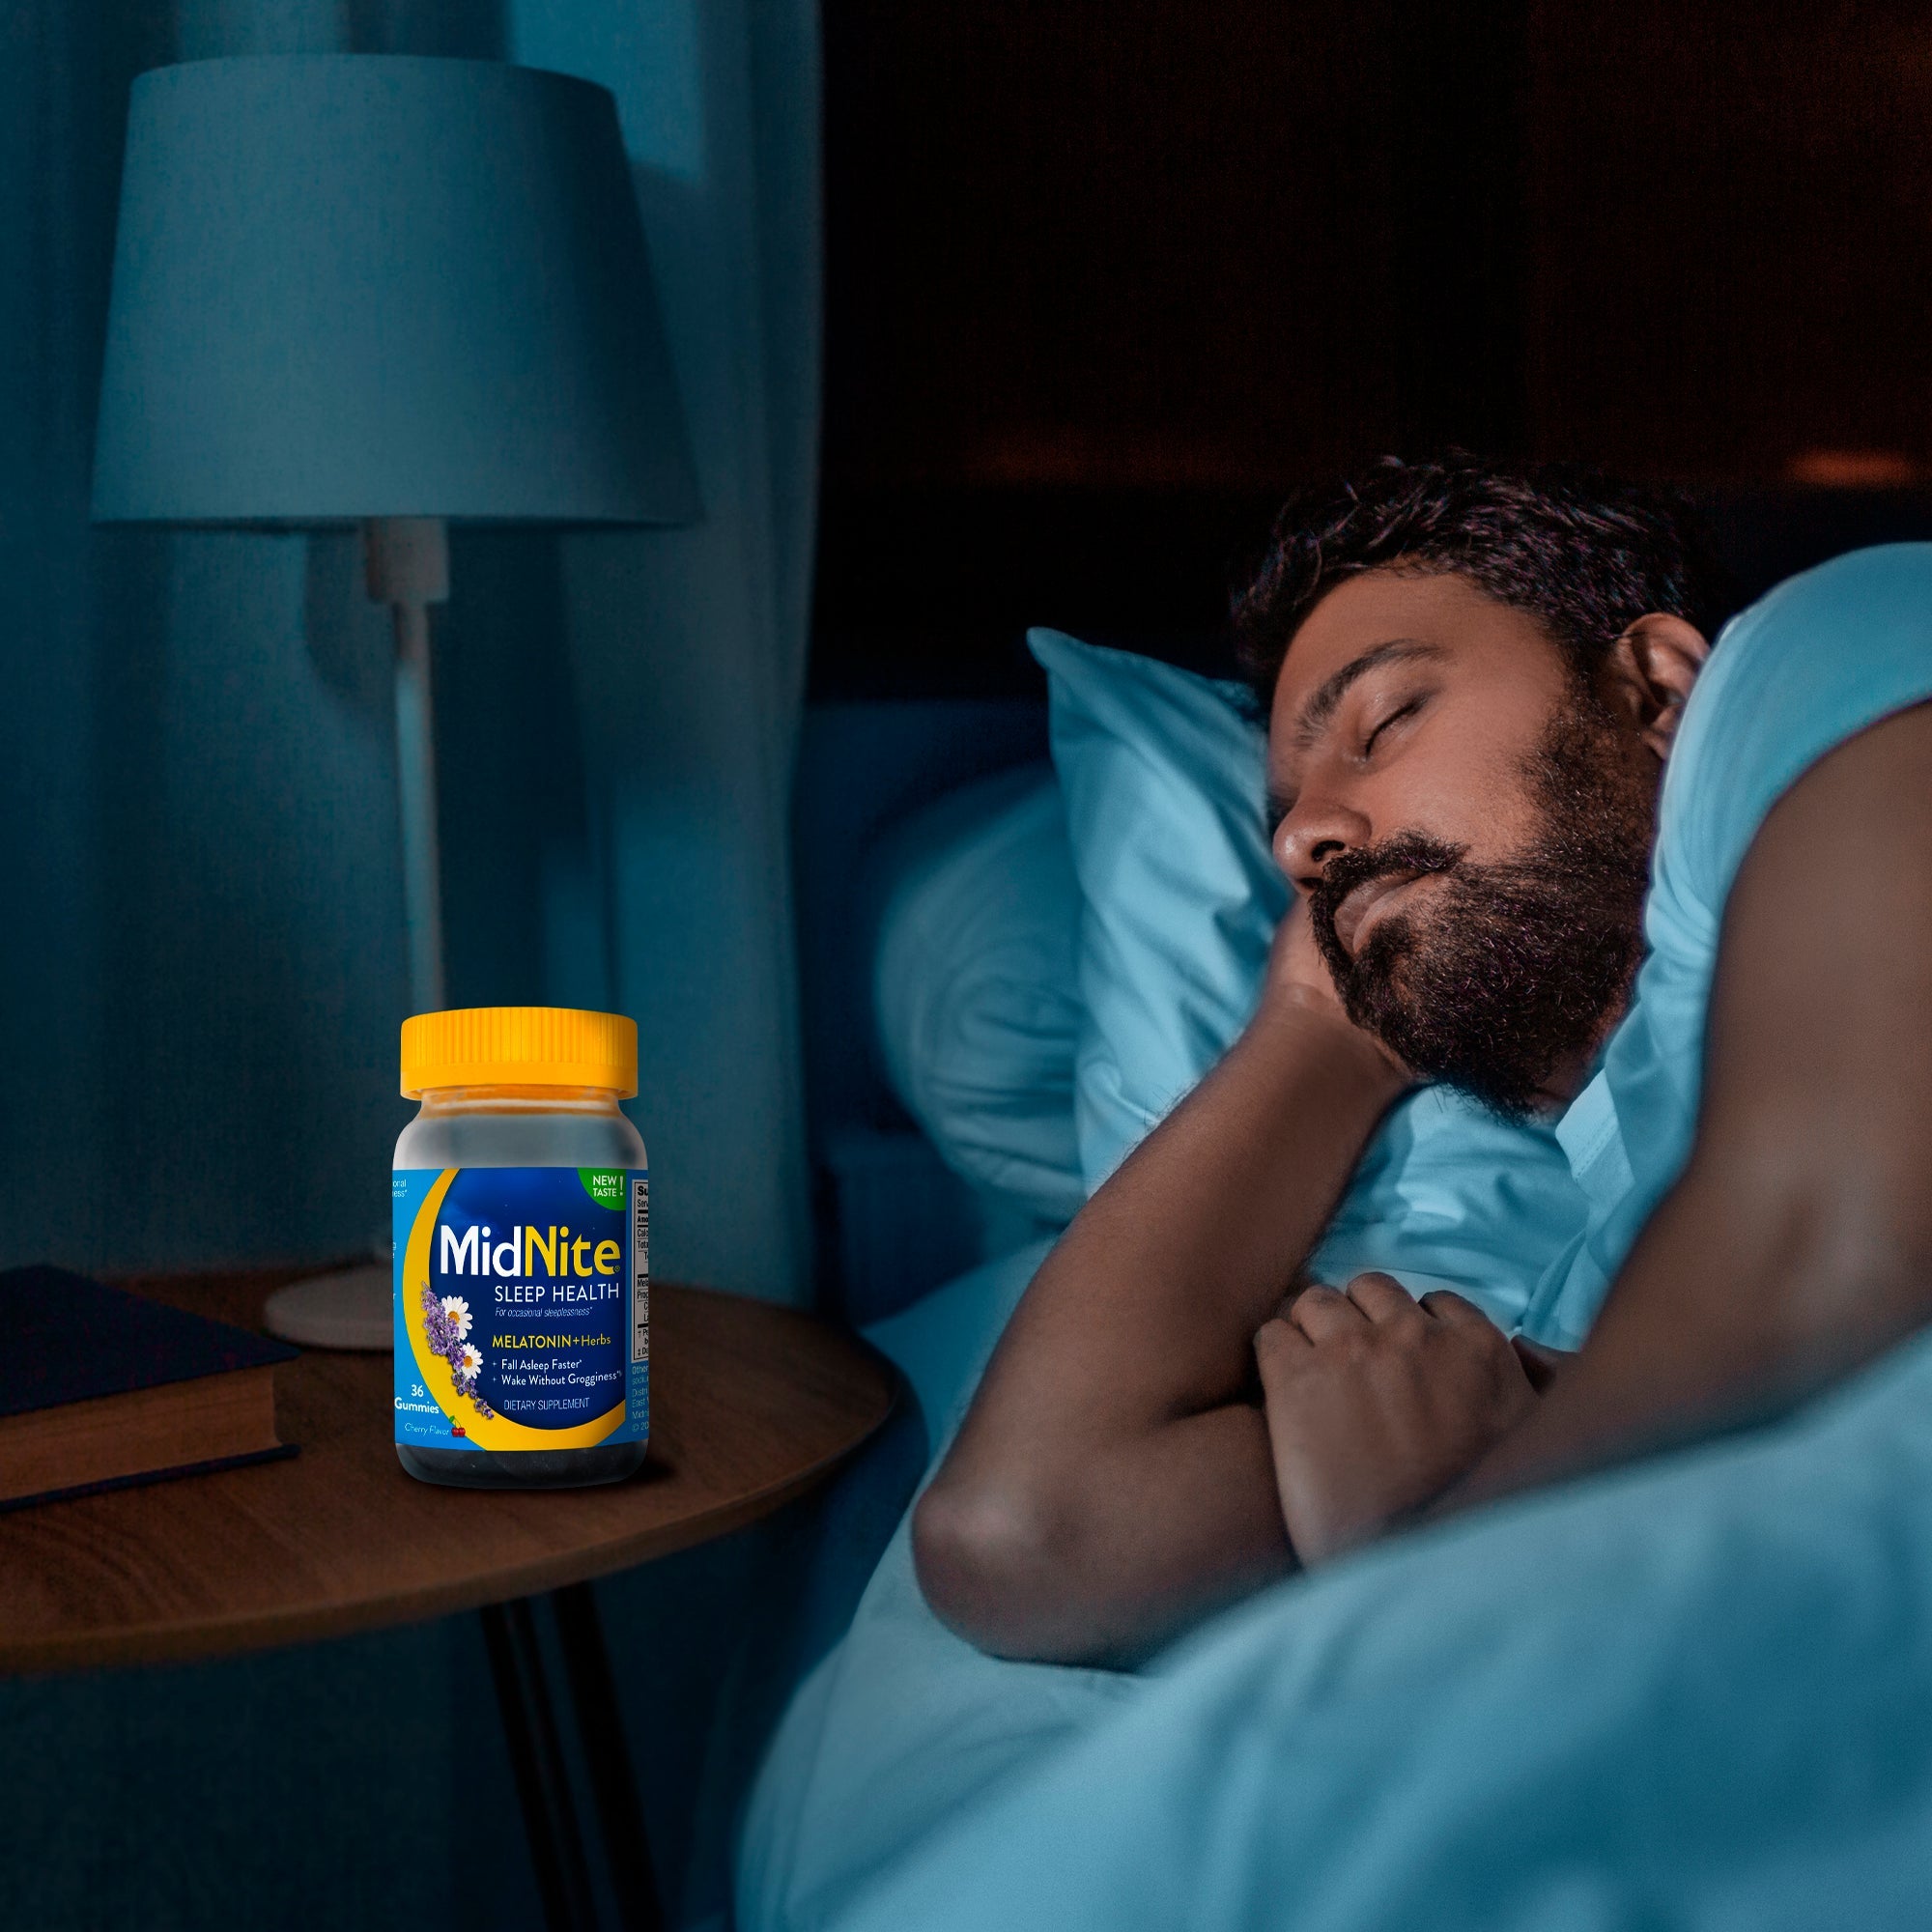 About MidNite® - MidNite Sleep Cycle Support